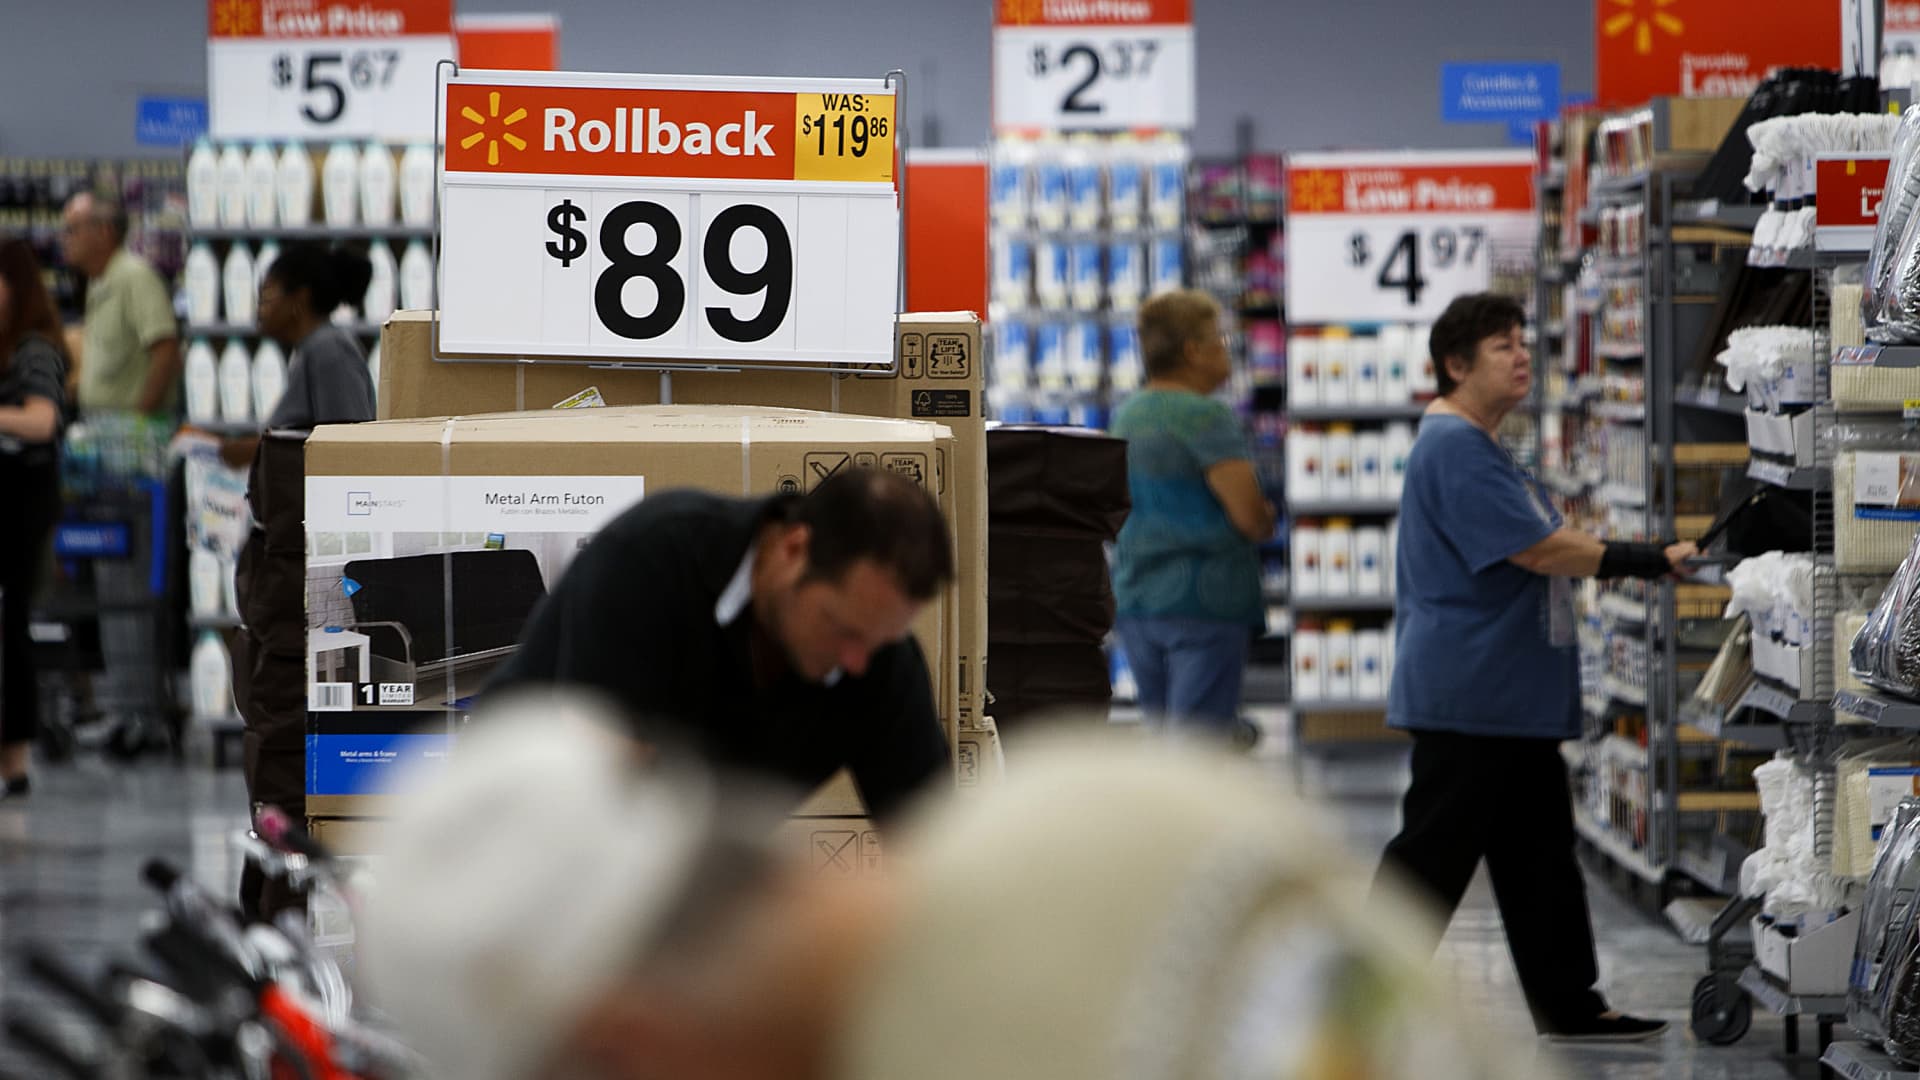 Walmart won’t hold rival event to Amazon Prime Day, as it is already offering big markdowns